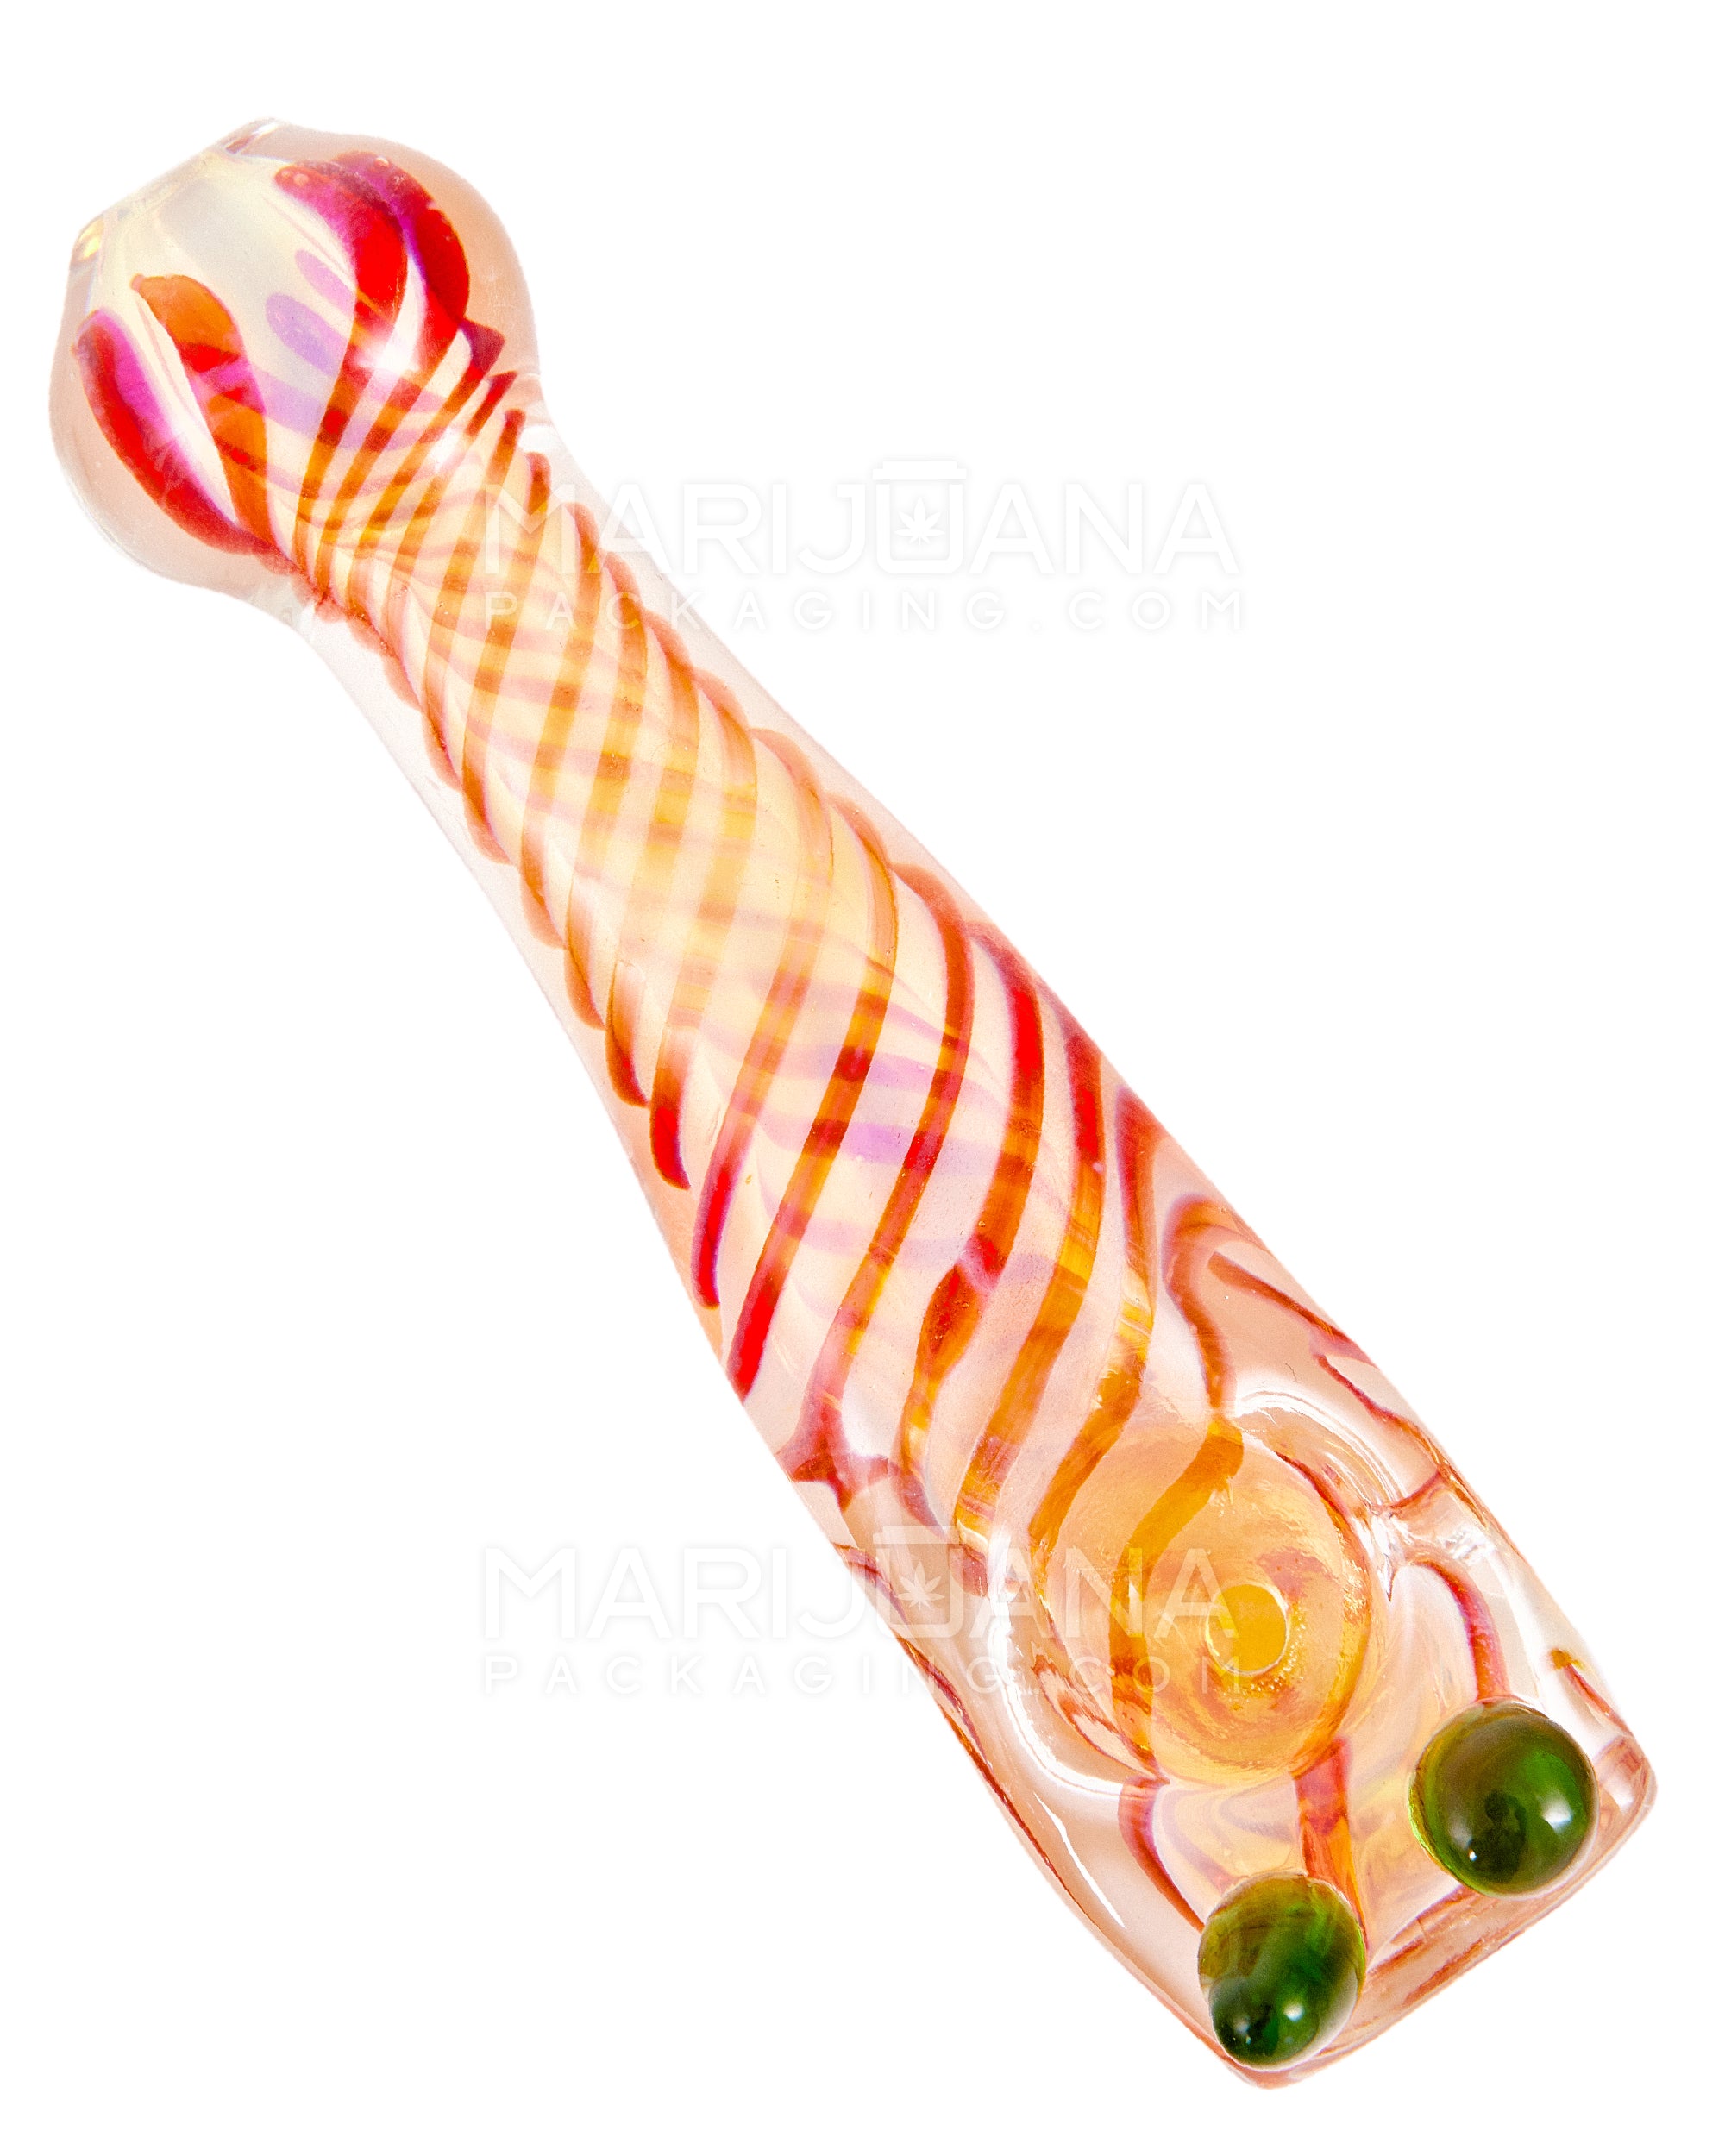 Spiral & Fumed Baseball Bat Hand Pipe w/ Double Knockers | 4.5in Long - Glass - Assorted - 1